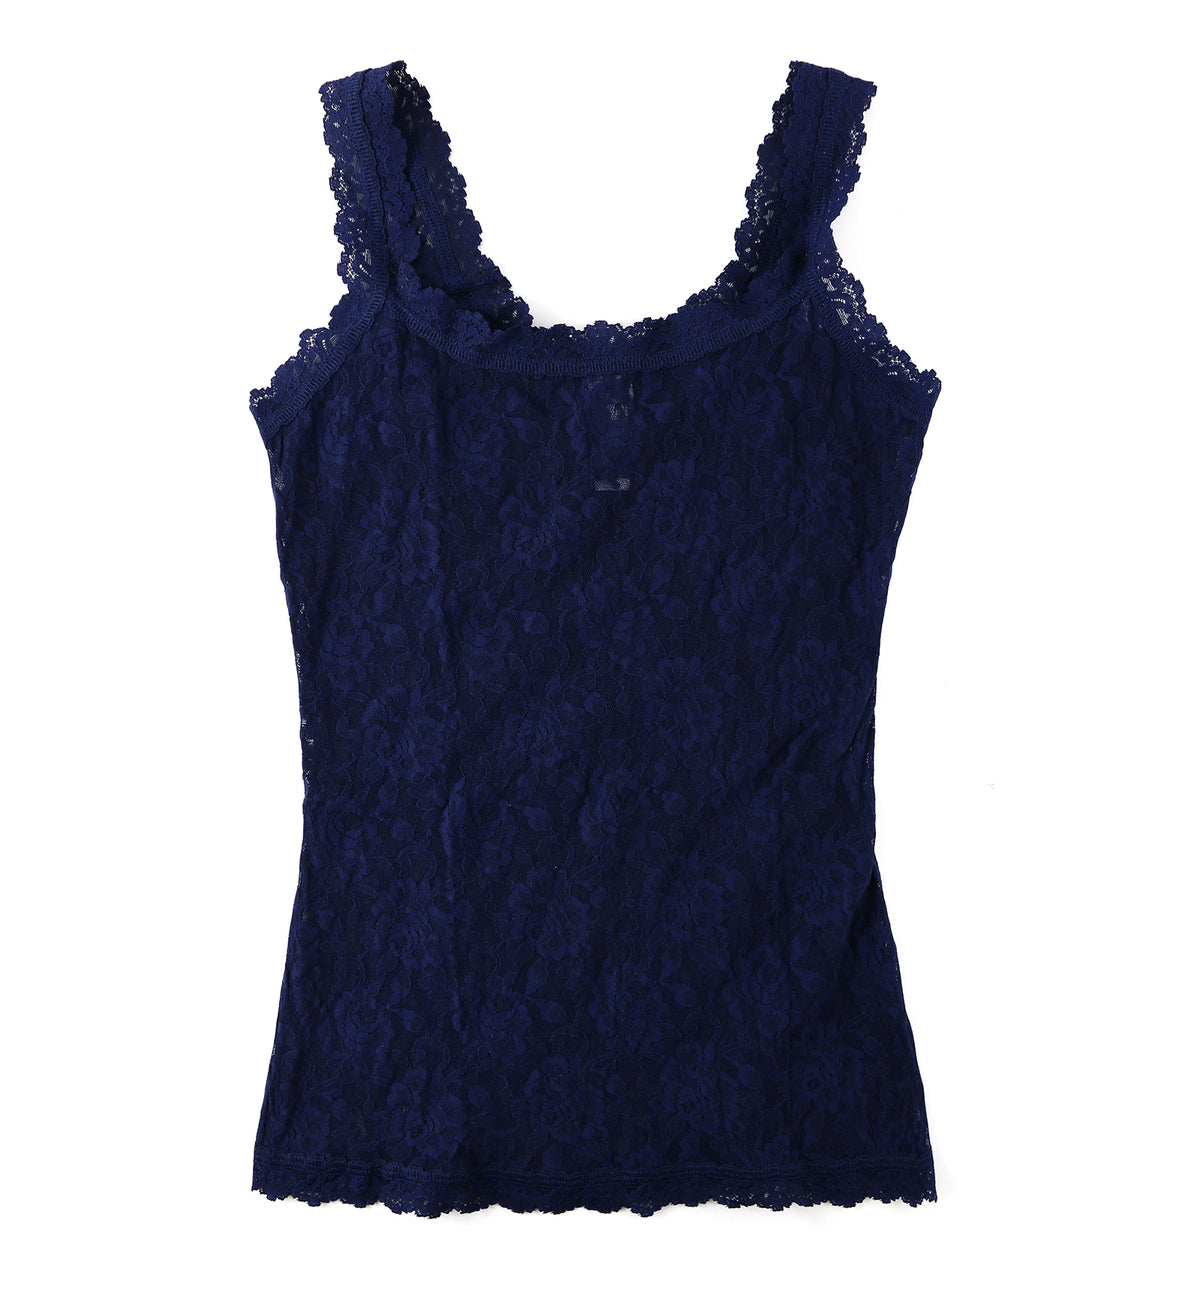 Hanky Panky Signature Lace Unlined Camisole (1390L),XS,Navy - Navy,XS